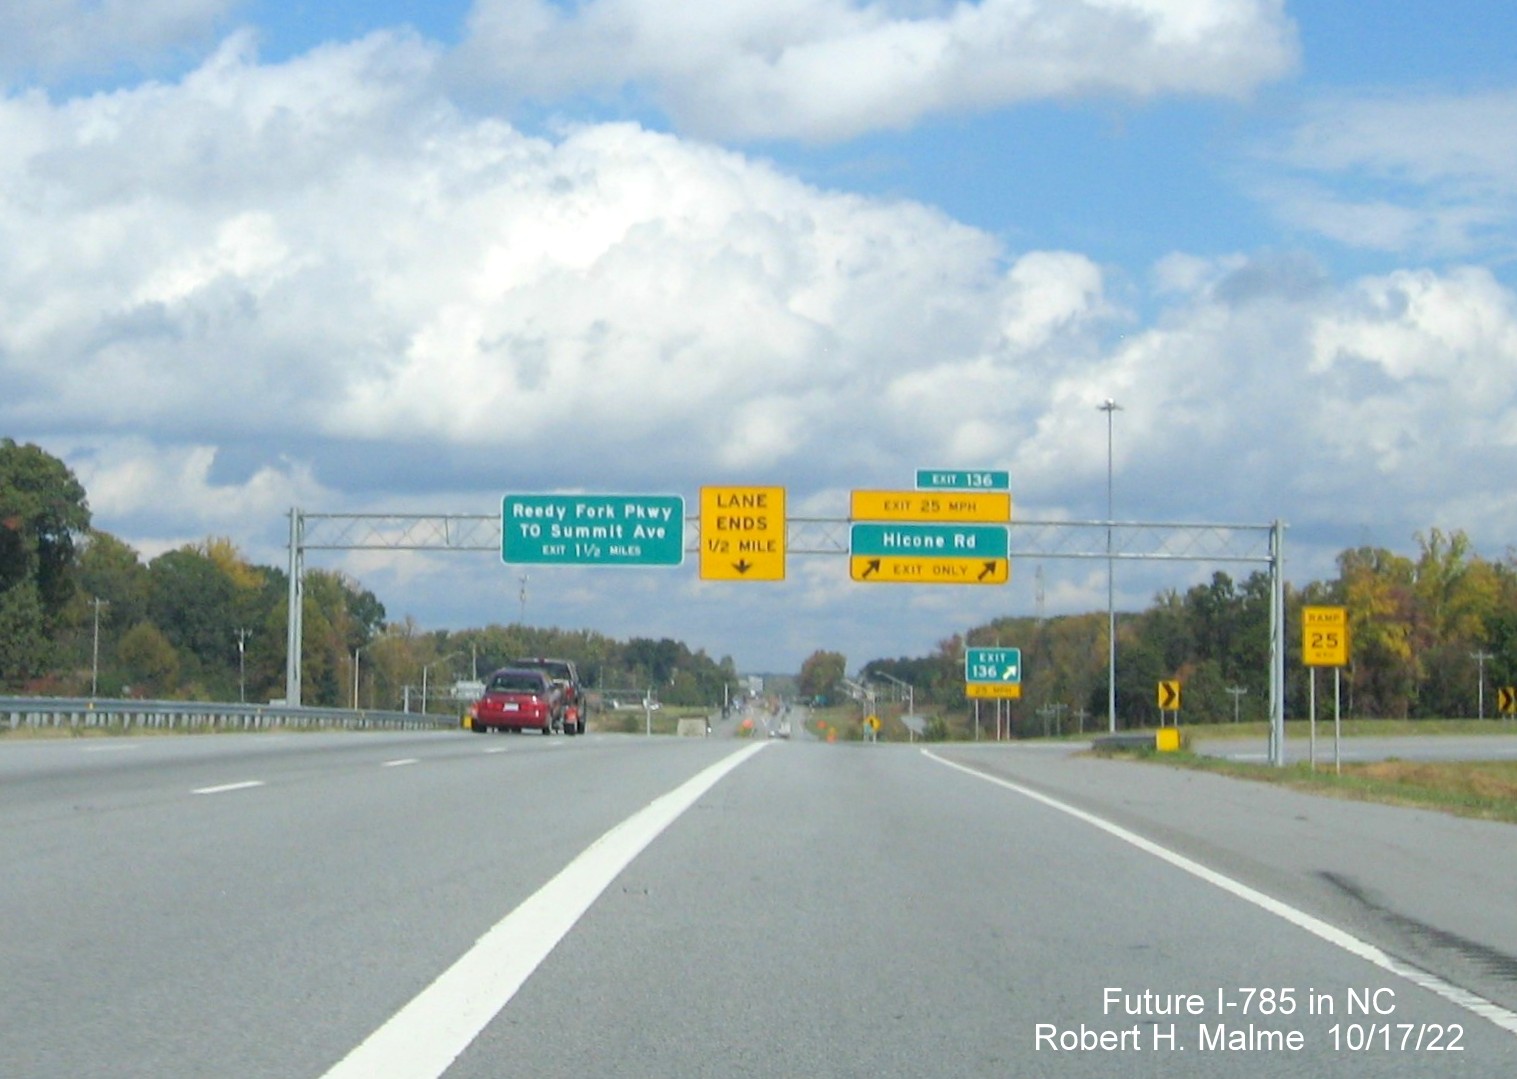 Image of overhead ramp sign for Hicone Road section on US 29 North, October 2022